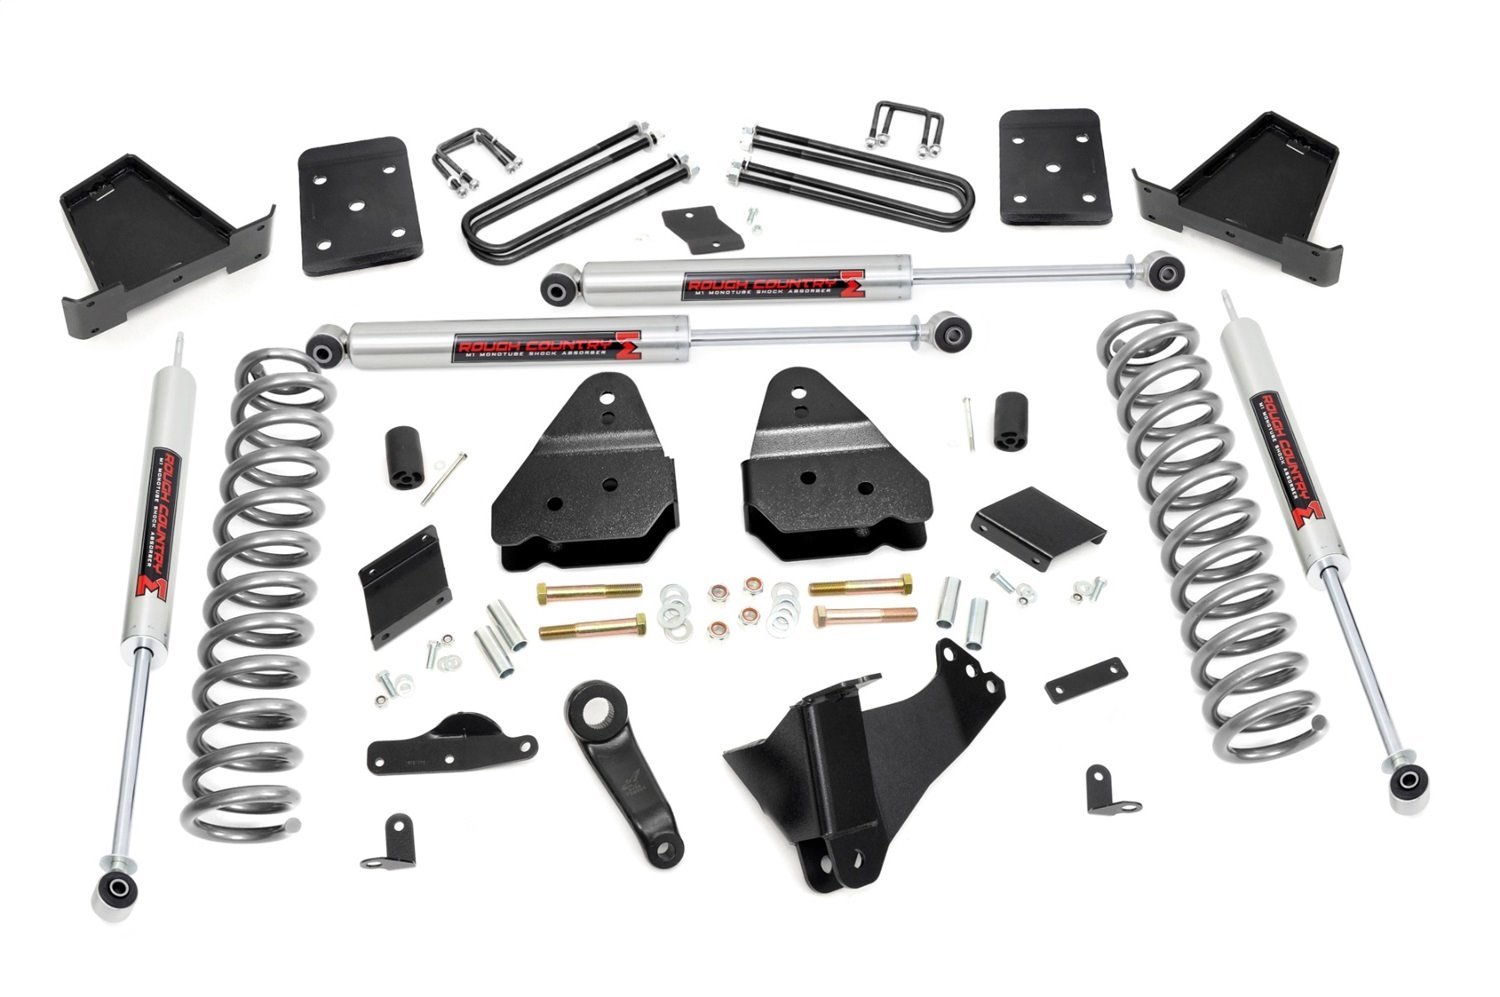 54840 6 in. Lift Kit, Diesel, OVLD, M1, Ford Super Duty 4WD (15-16)